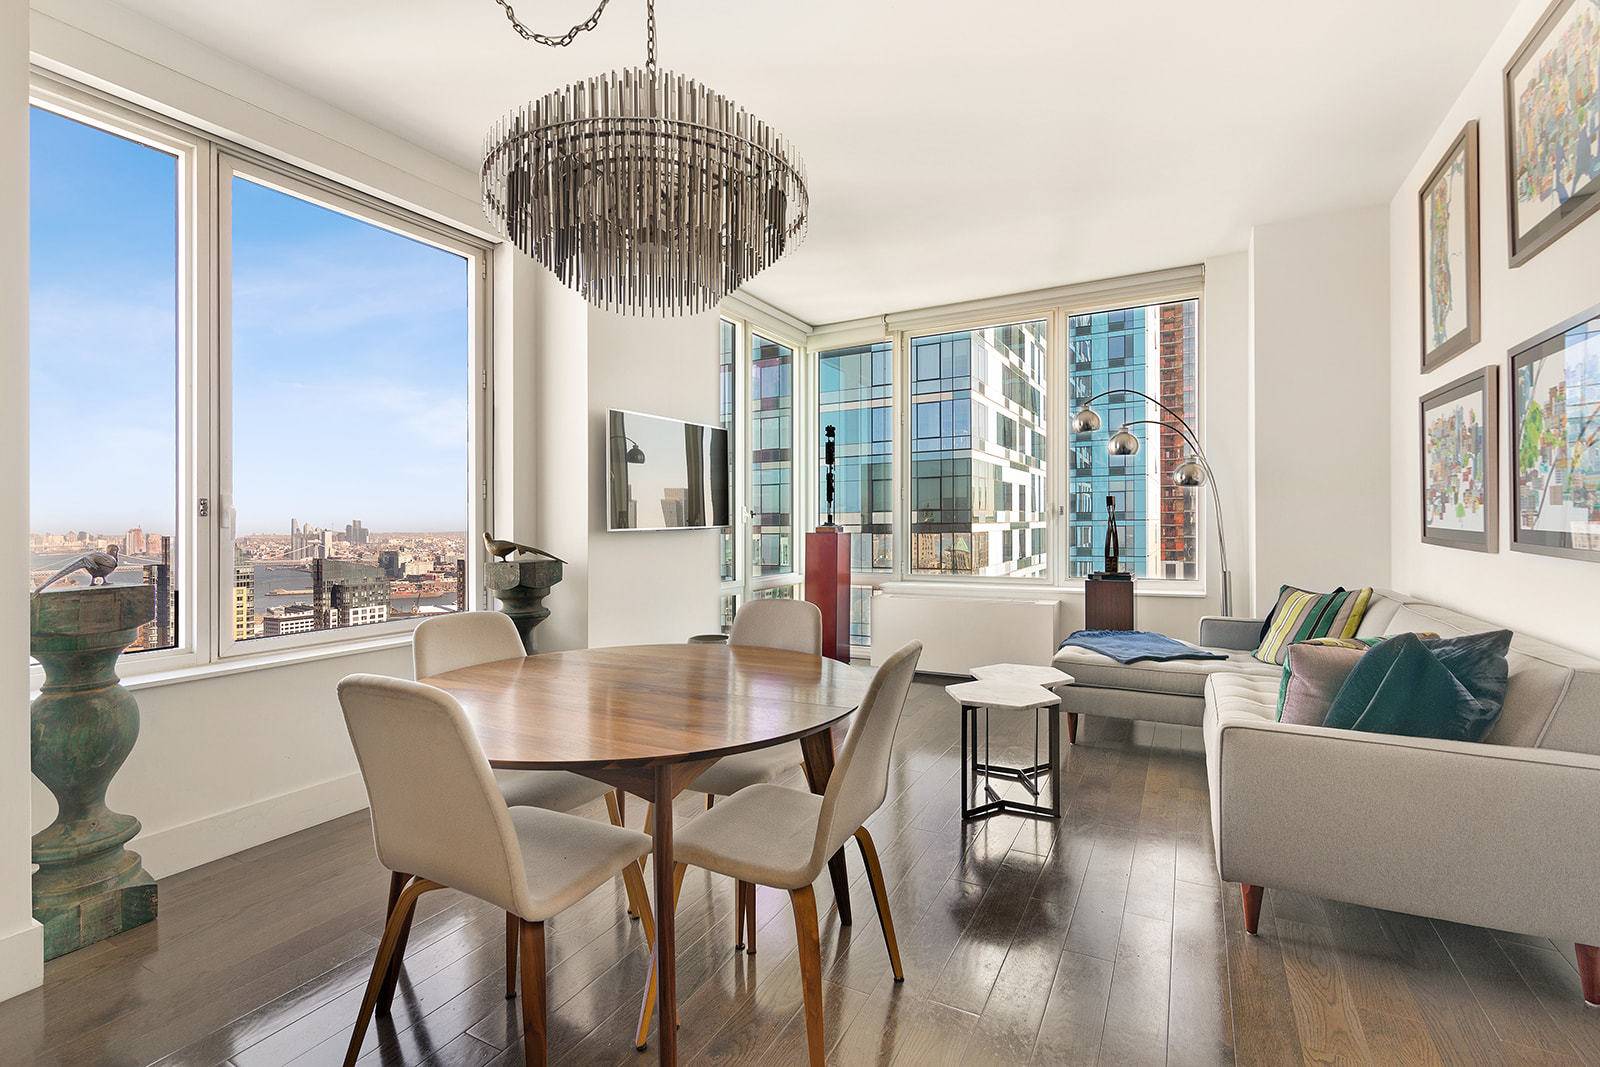 Endless cityscape views from this large 2 bed, 2 bath corner unit in Brooklyn s tallest tower 388 Bridge Street.